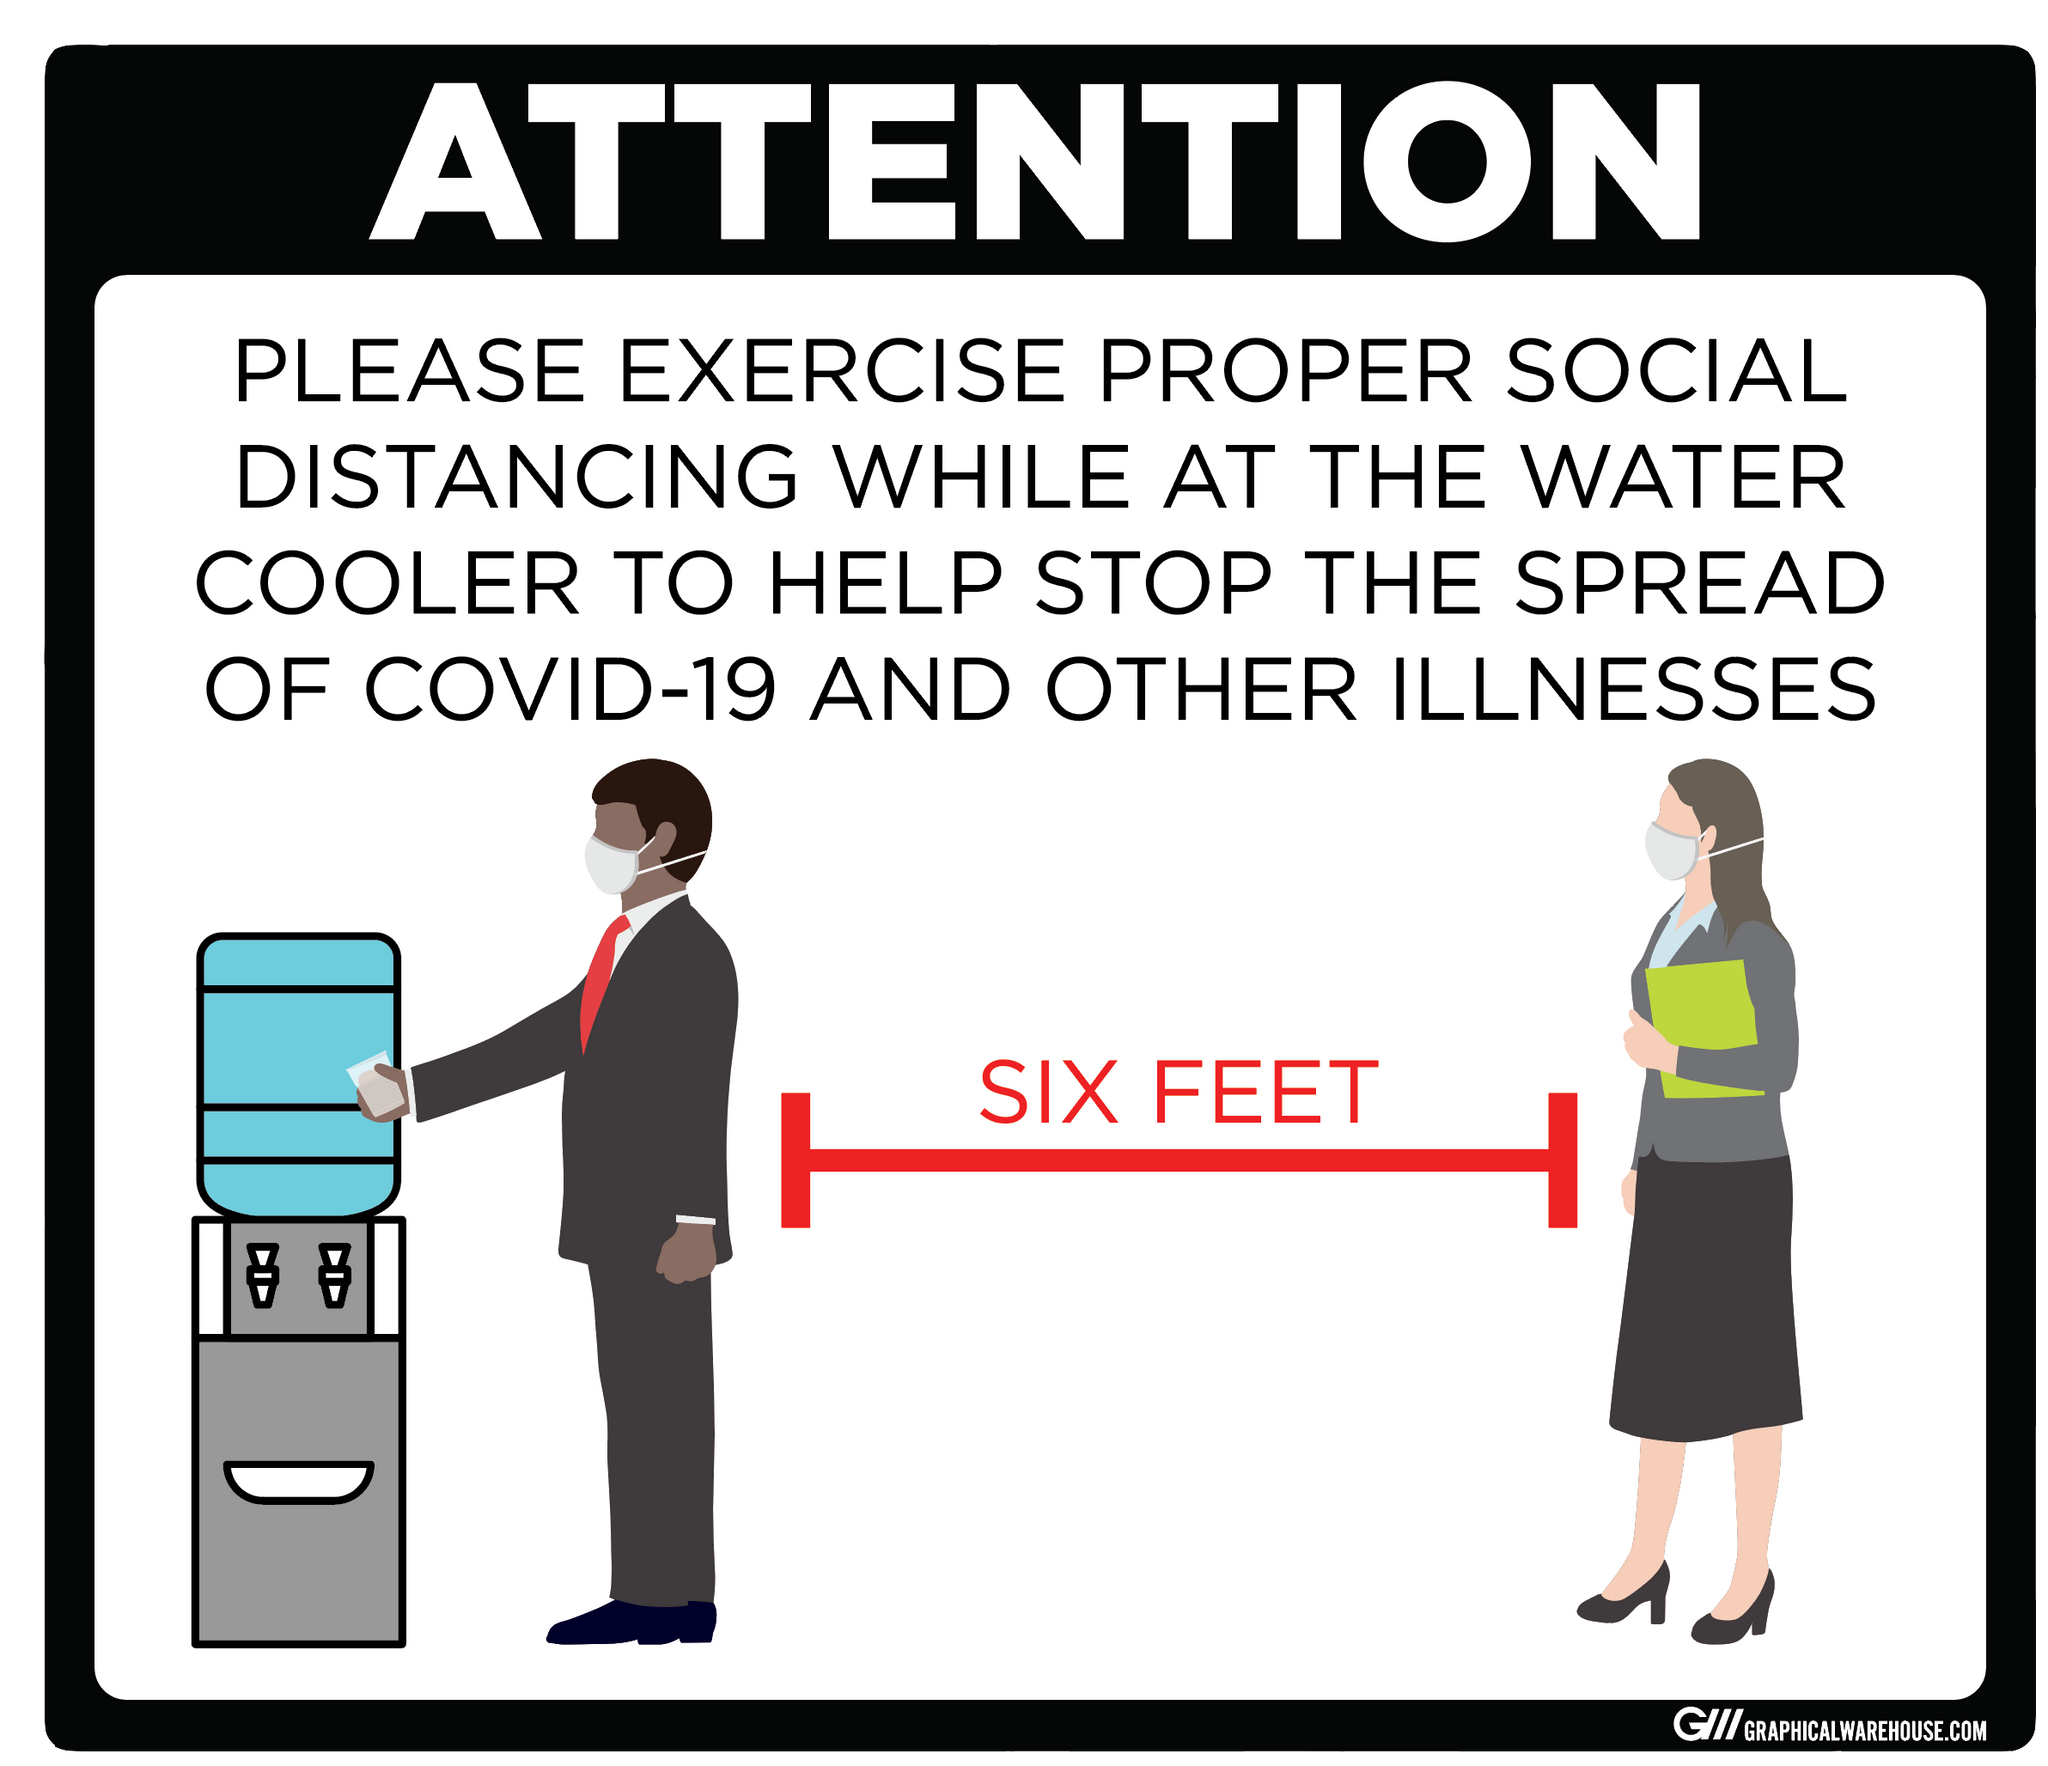 "Practice Social Distancing while at Water Cooler" Adhesive Durable Vinyl Decal- Various Sizes/Colors Available